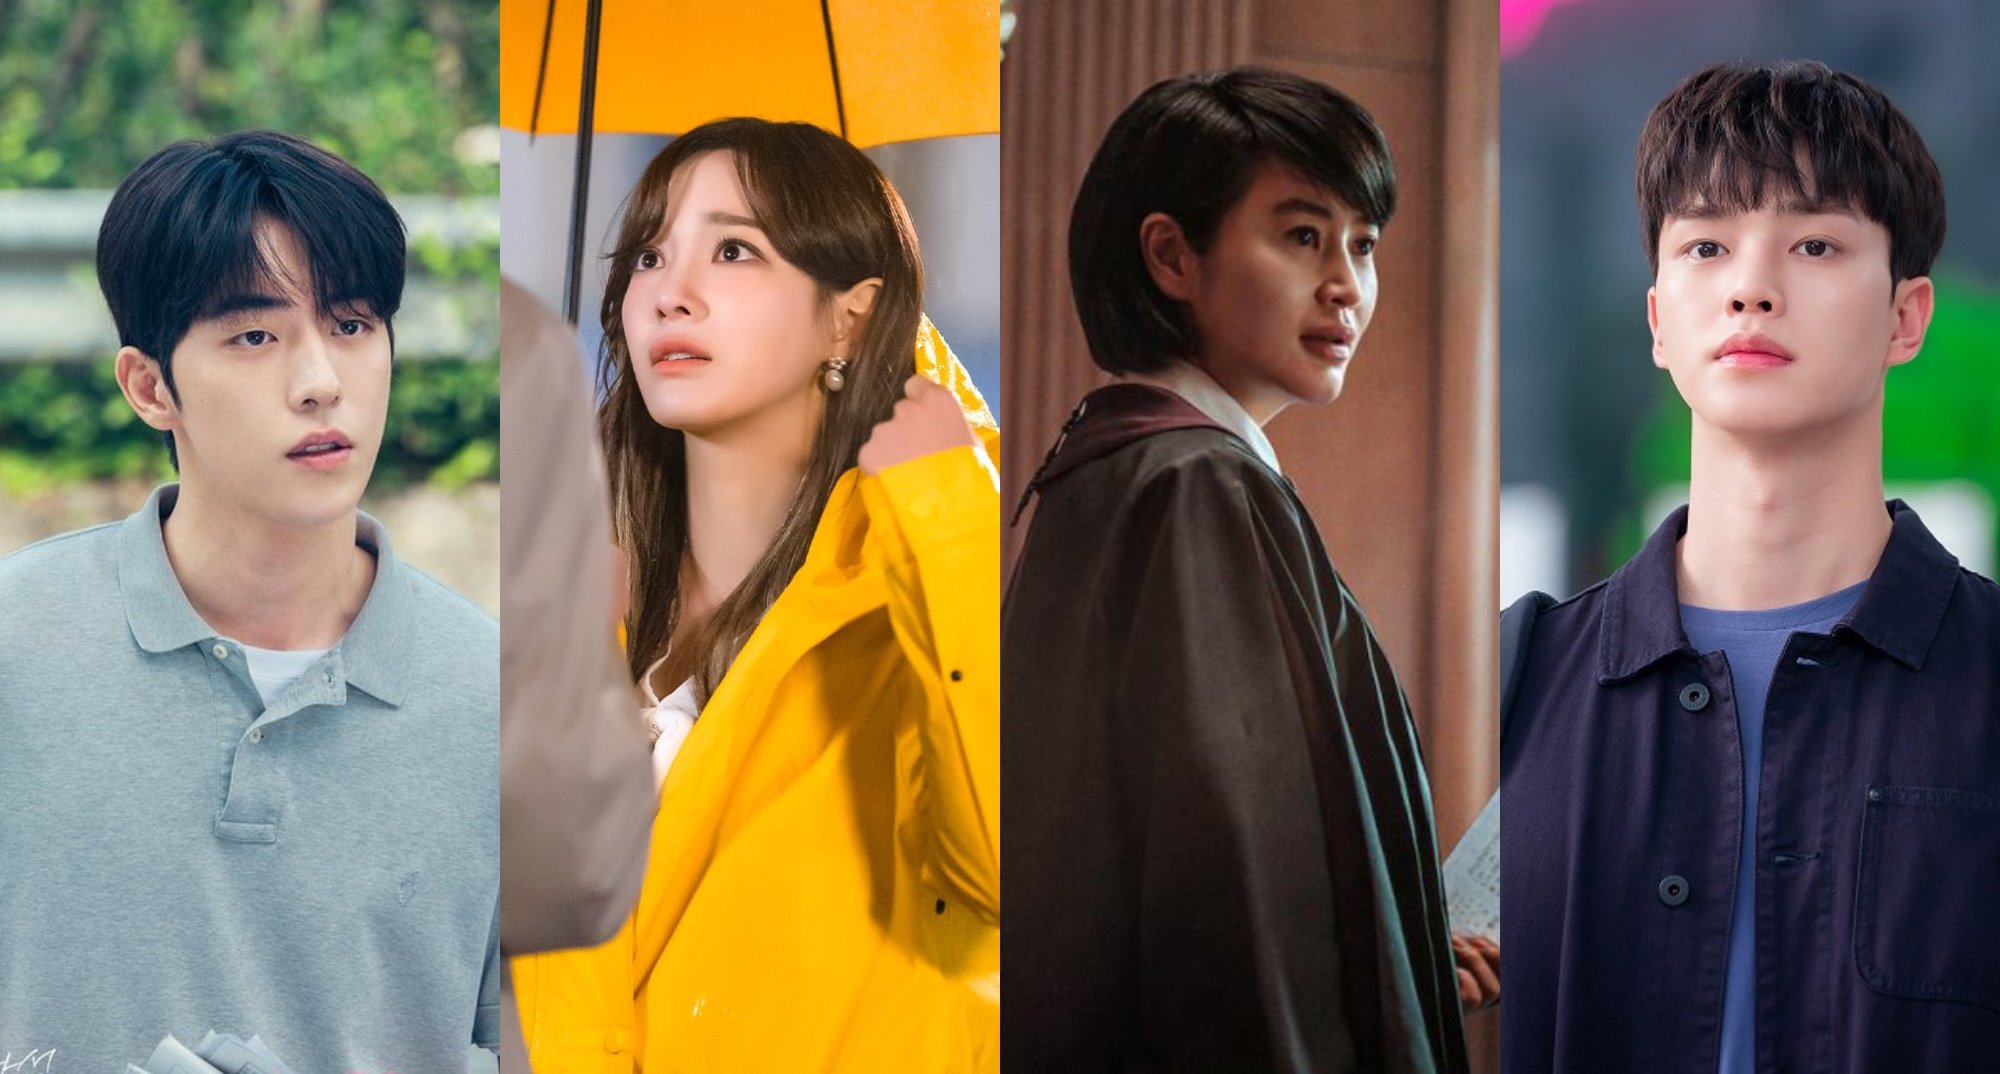 Netflix February K-dramas like 'Business Proposal' and 'Juvenile Justice' including Song Kang.